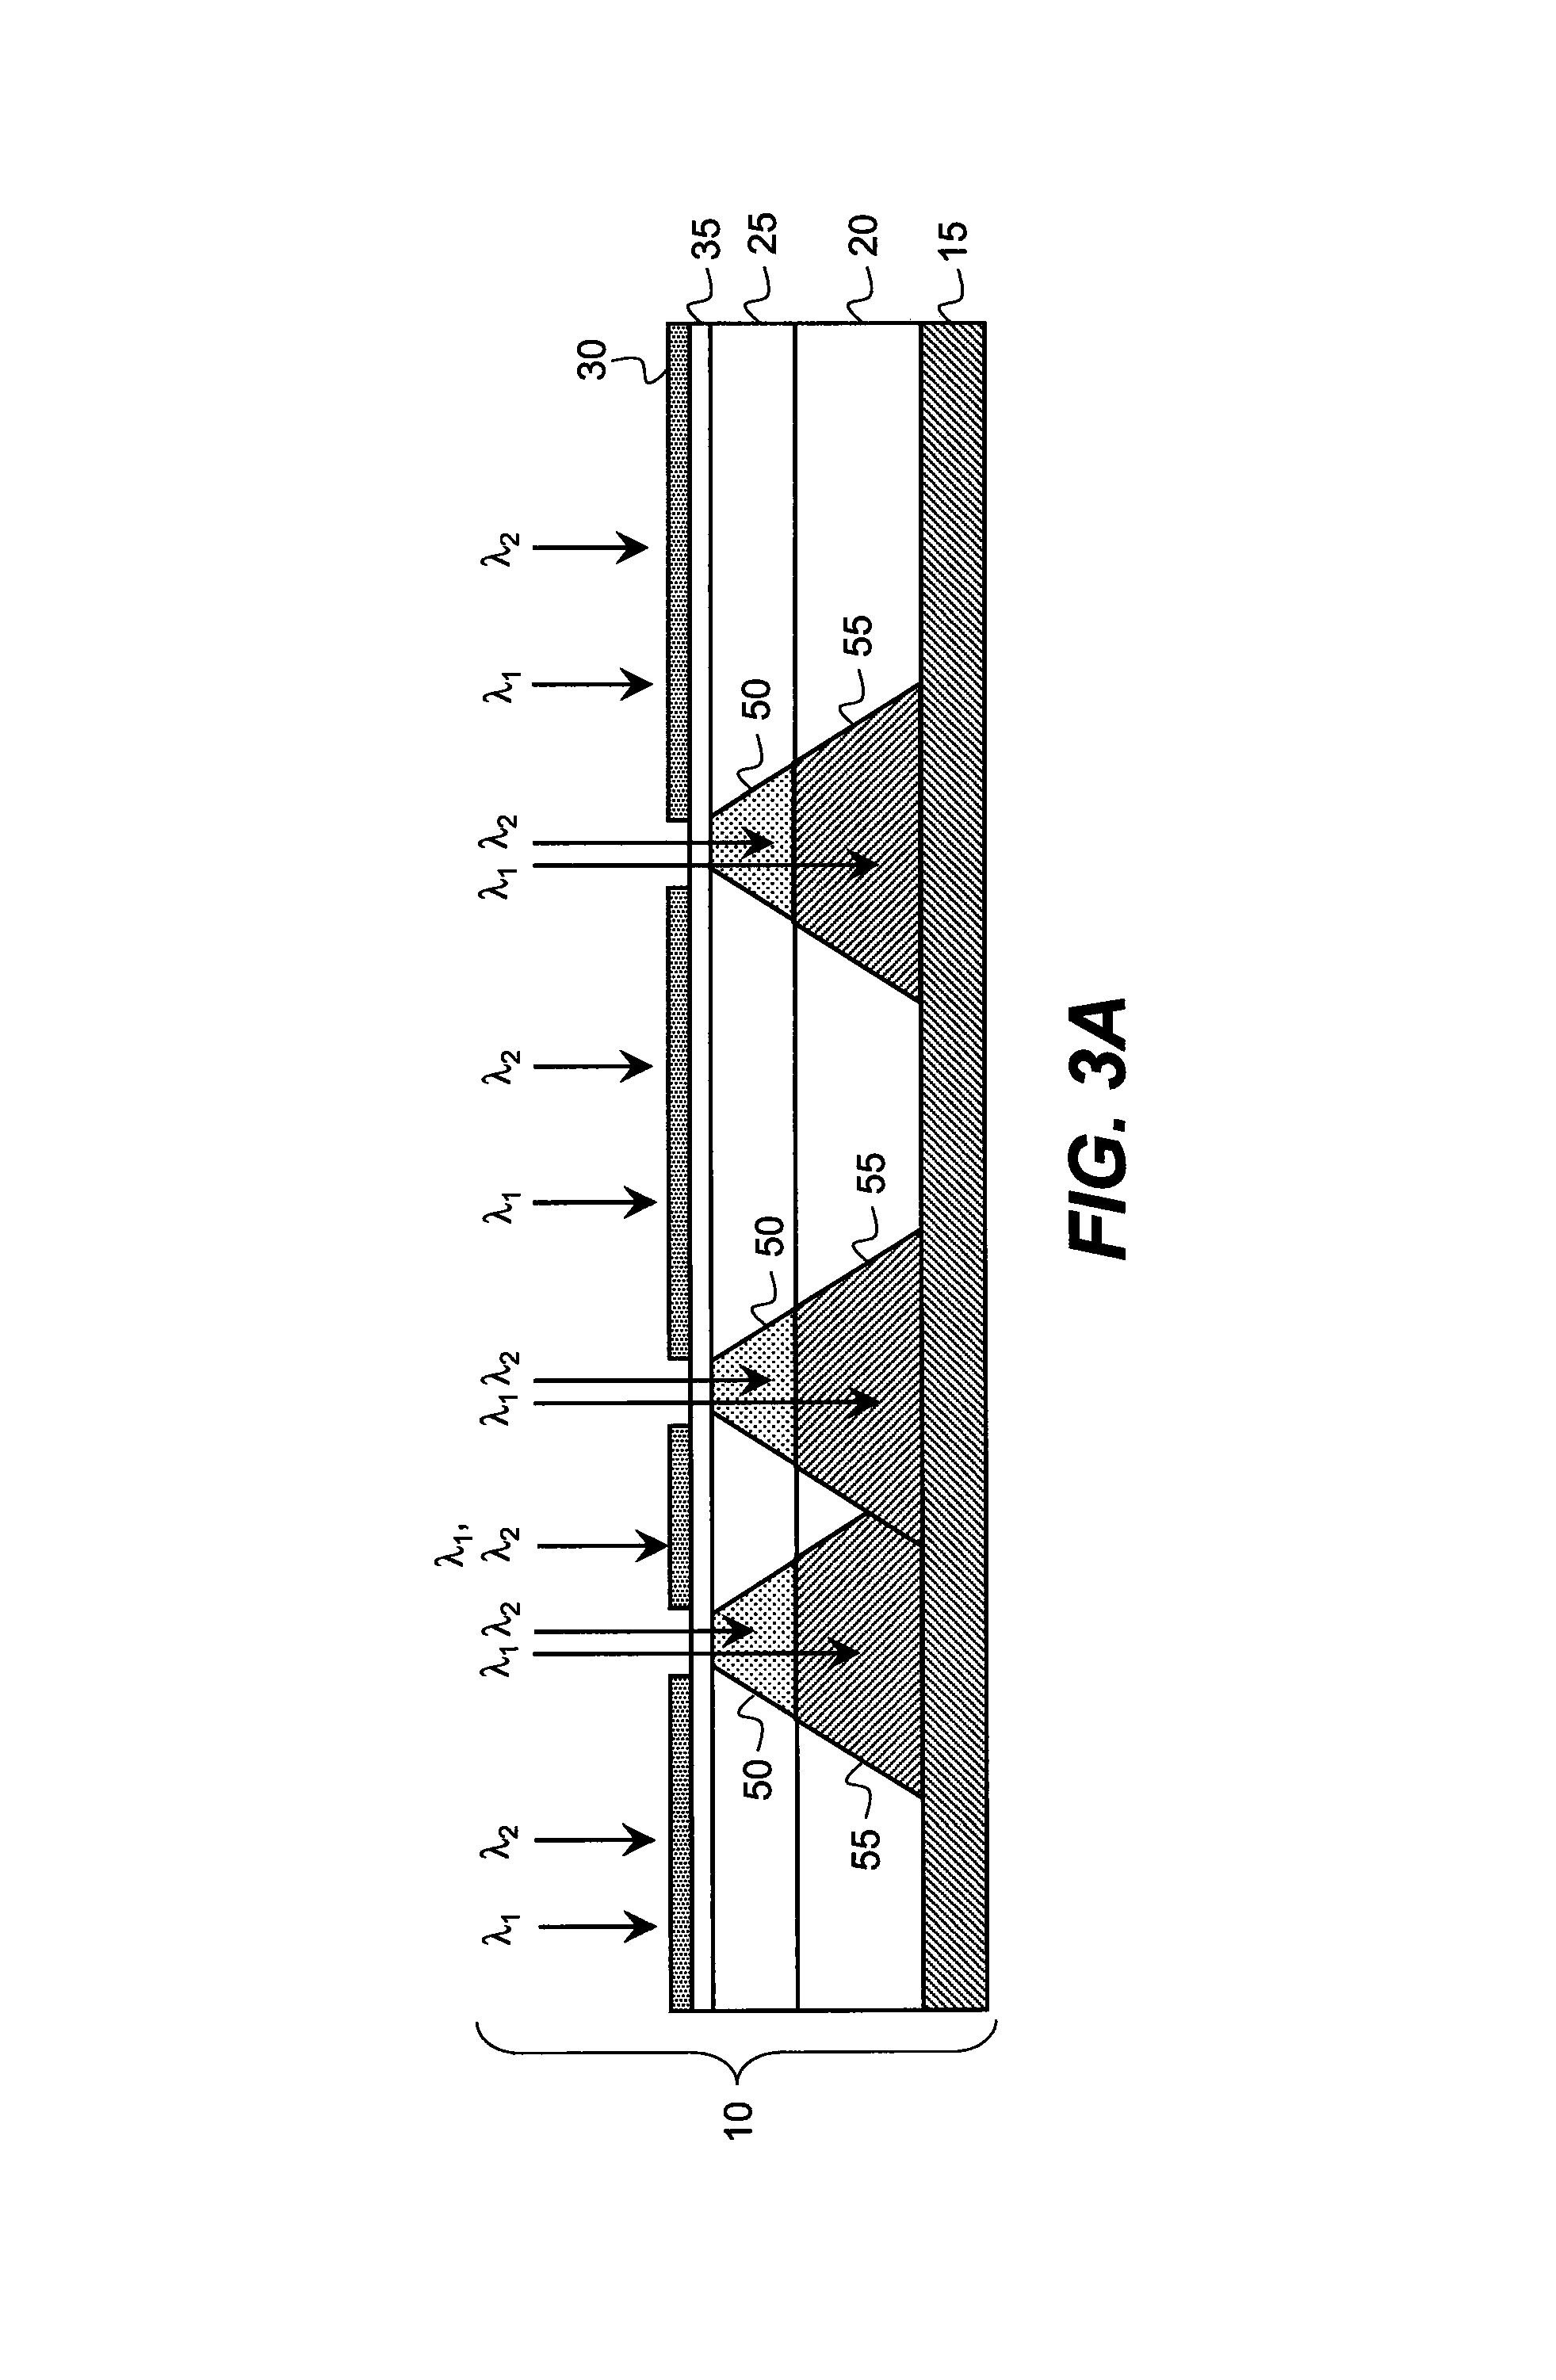 Flexographic element and method of imaging